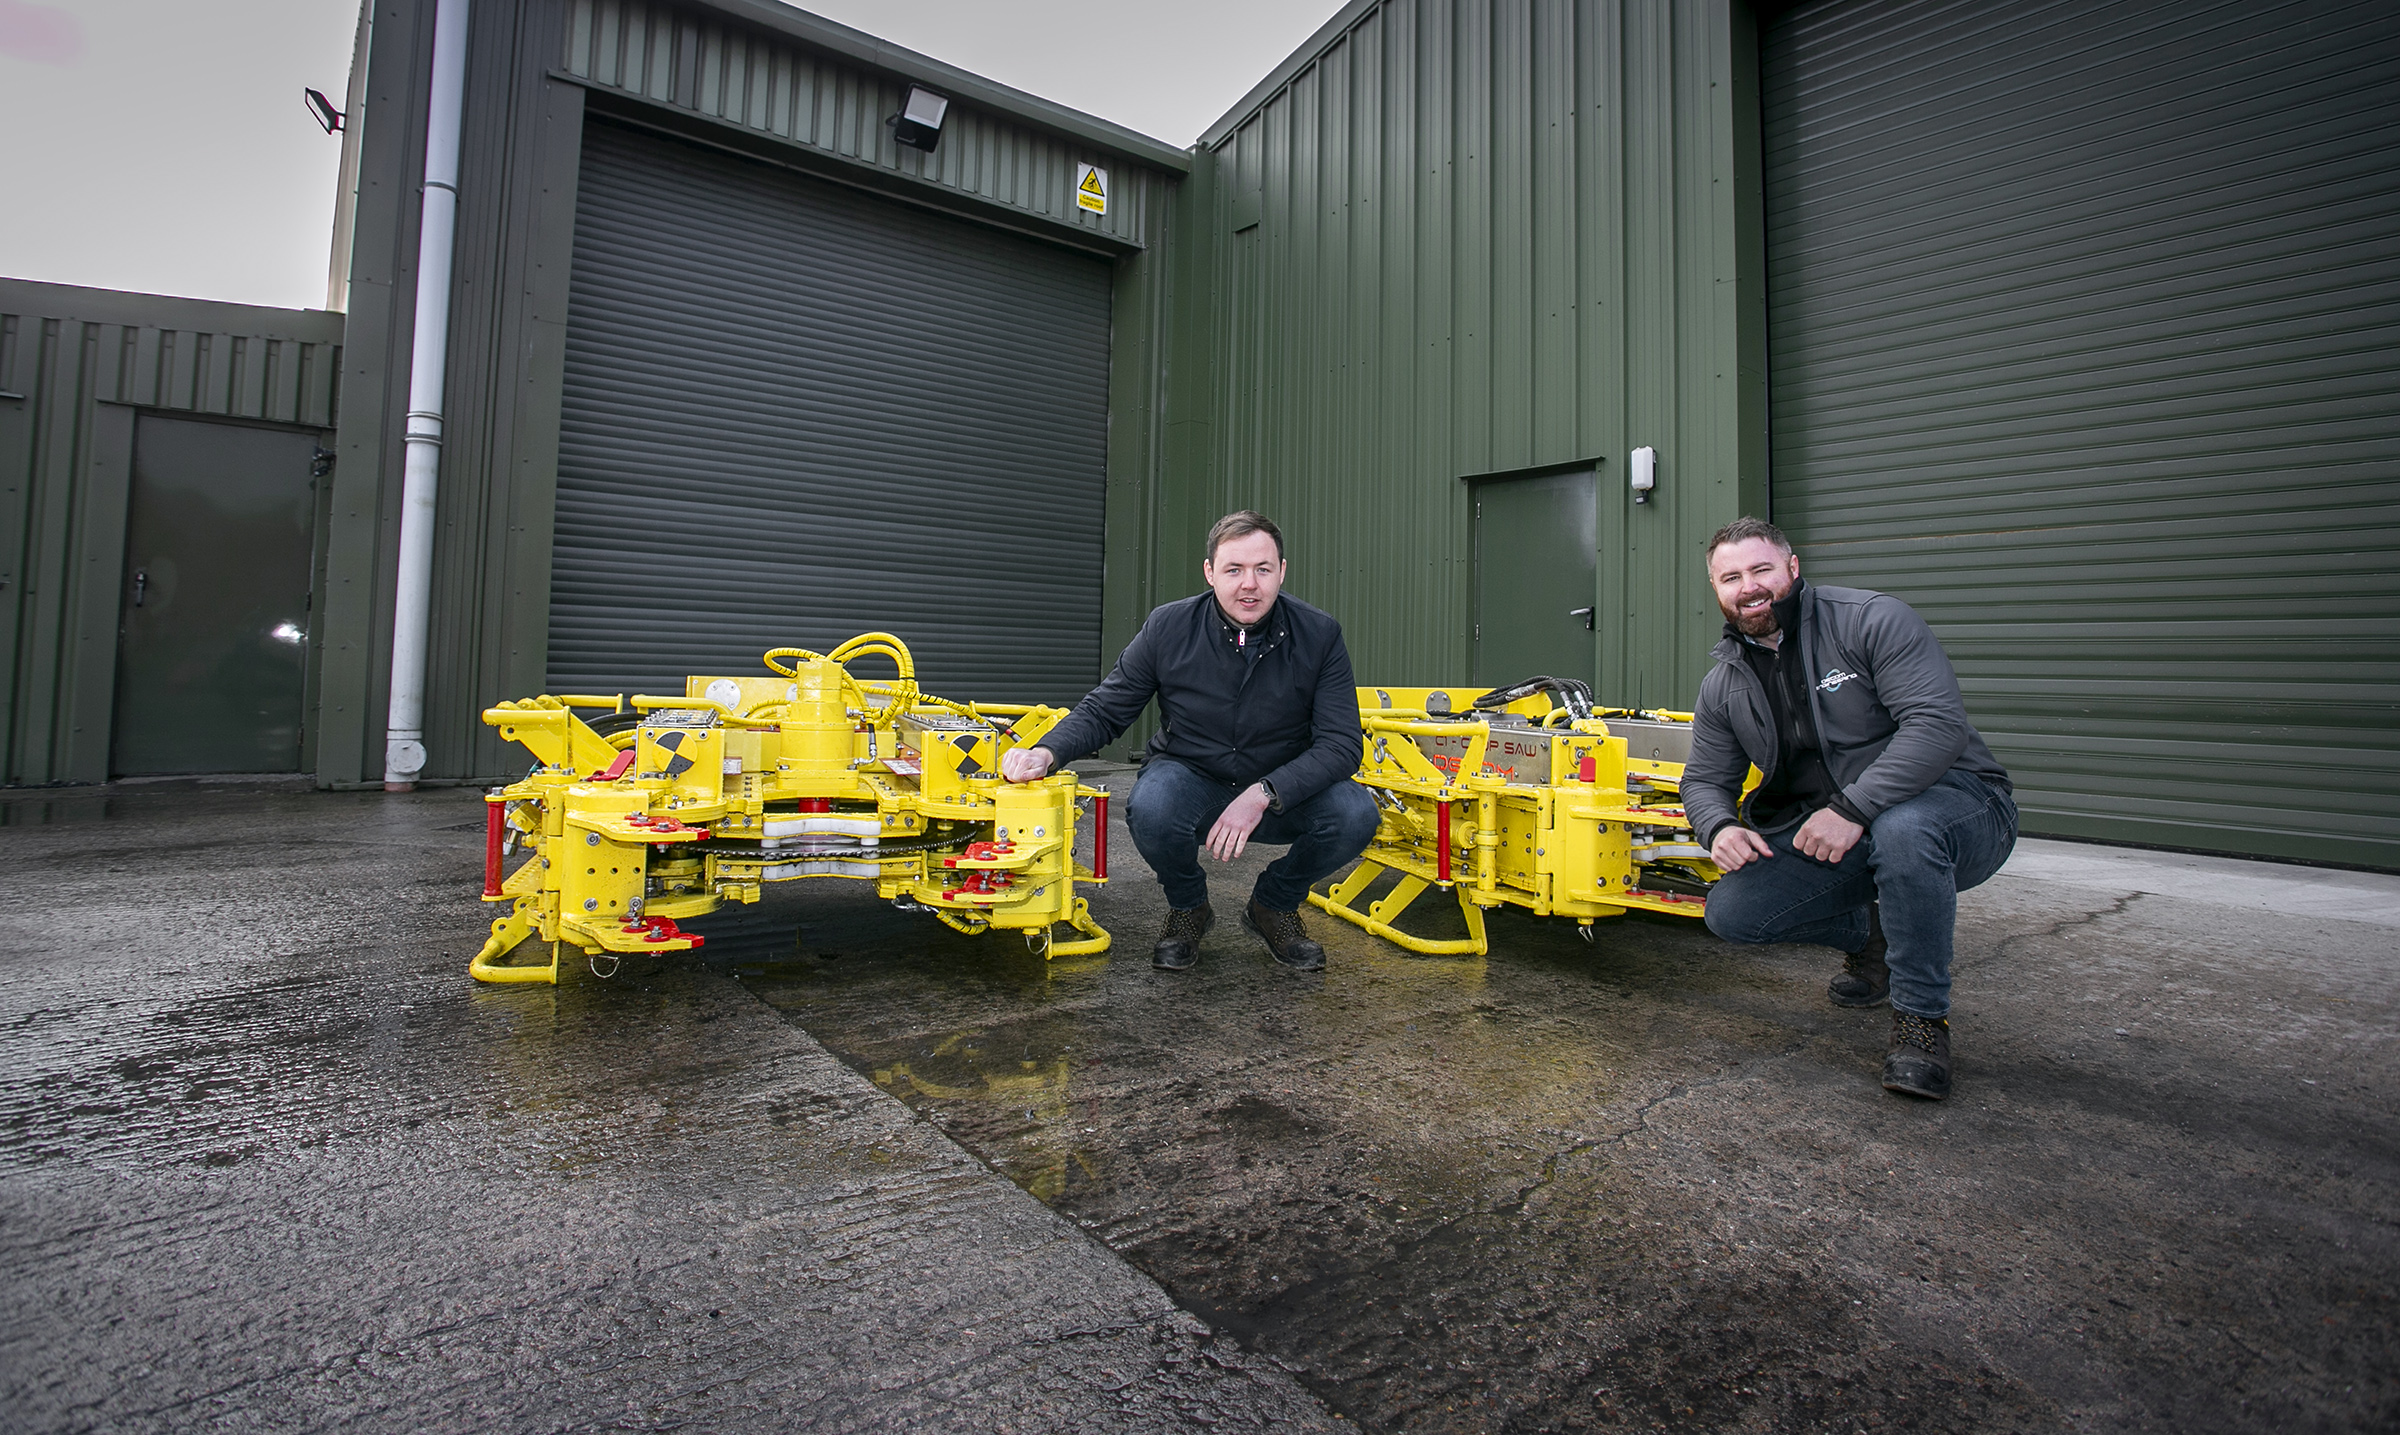 Decom Engineering invests over £250,000 in new Aberdeen base